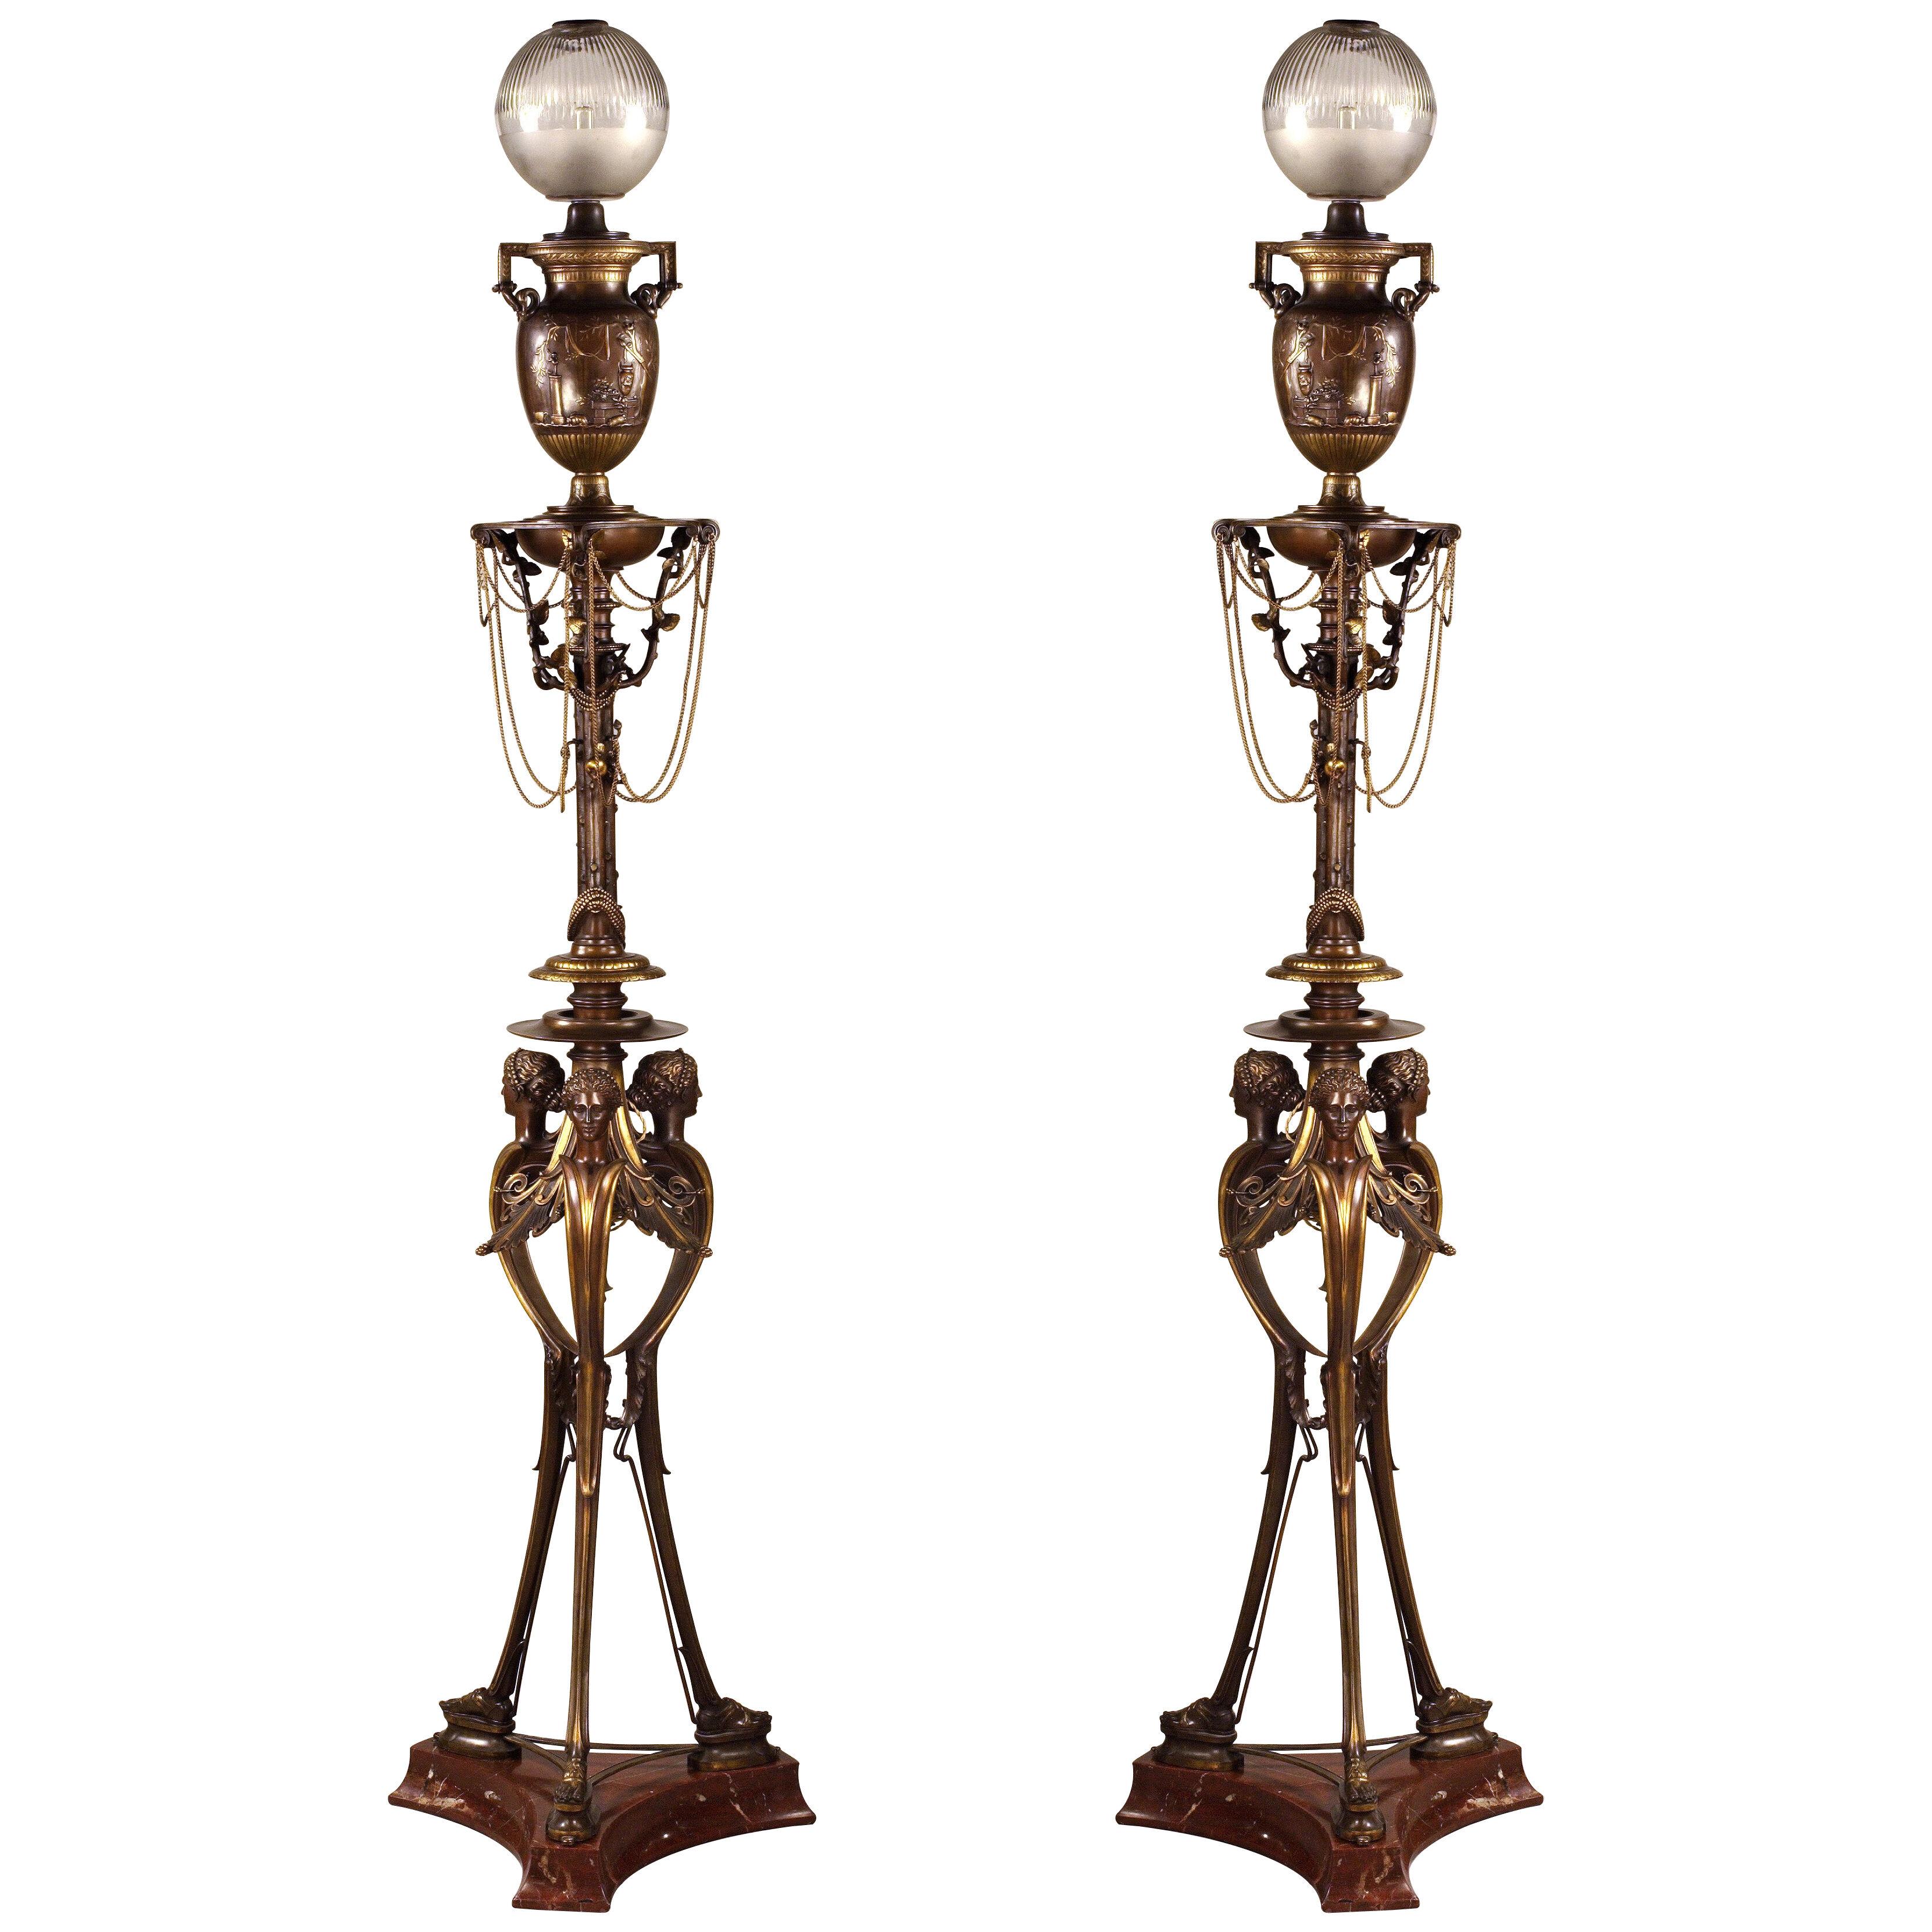 Pair of Neo-Greek Floor Lamps by H. Cahieux and F. Barbedienne, France, c. 1855